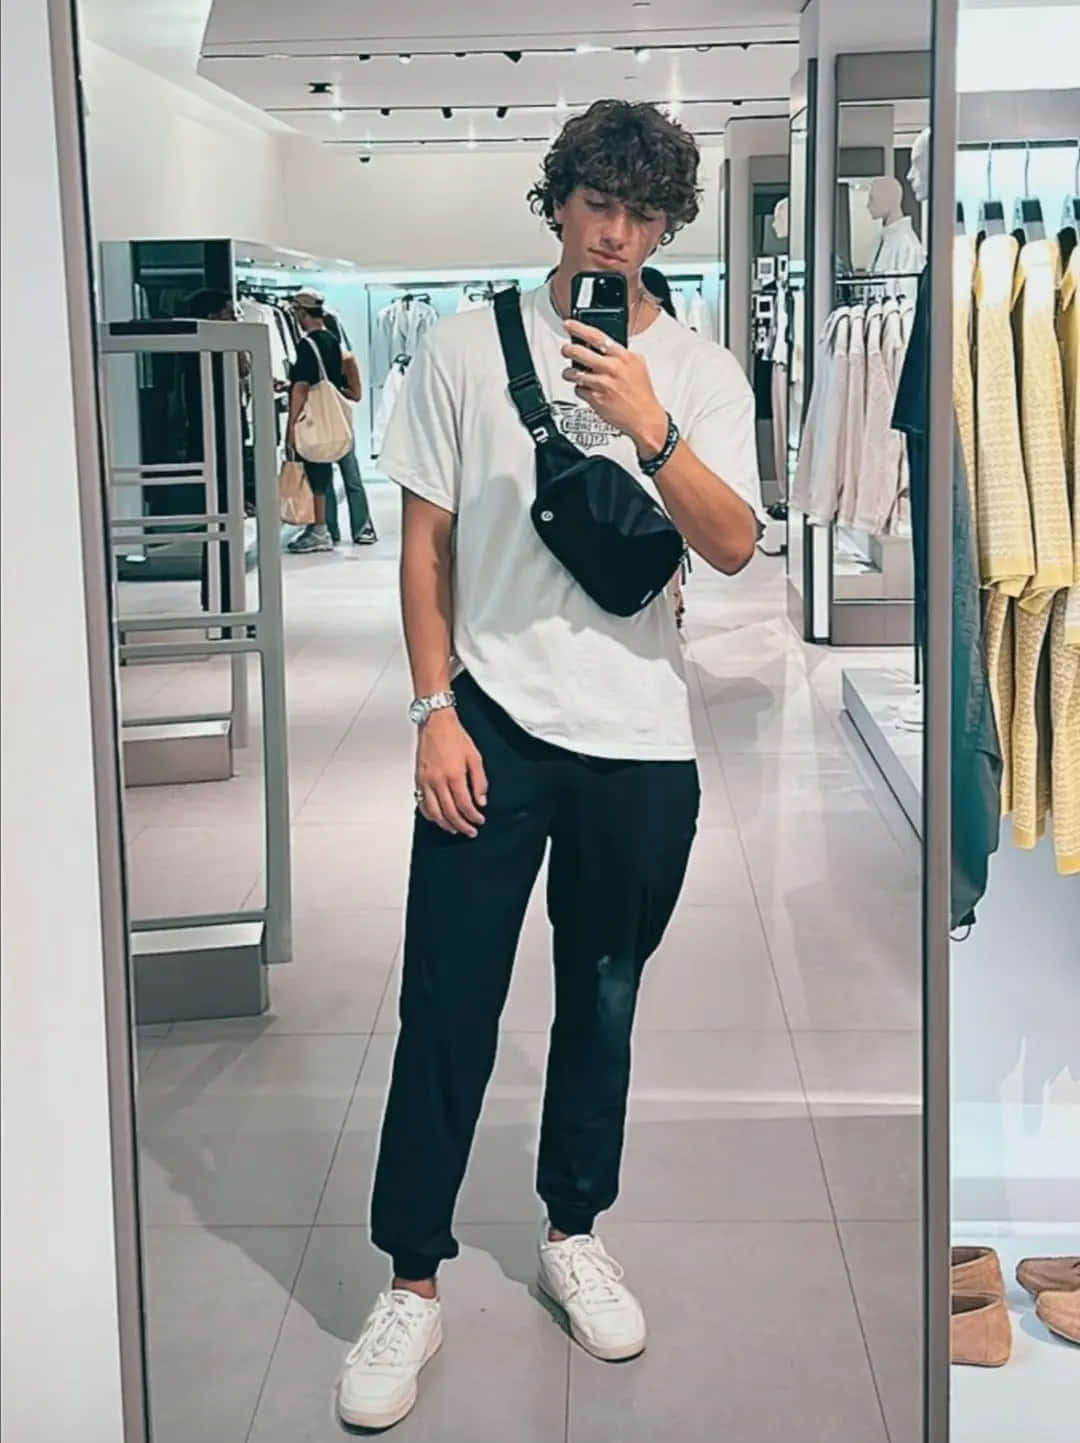 Young Man Mirror Selfie Fashion Store Background